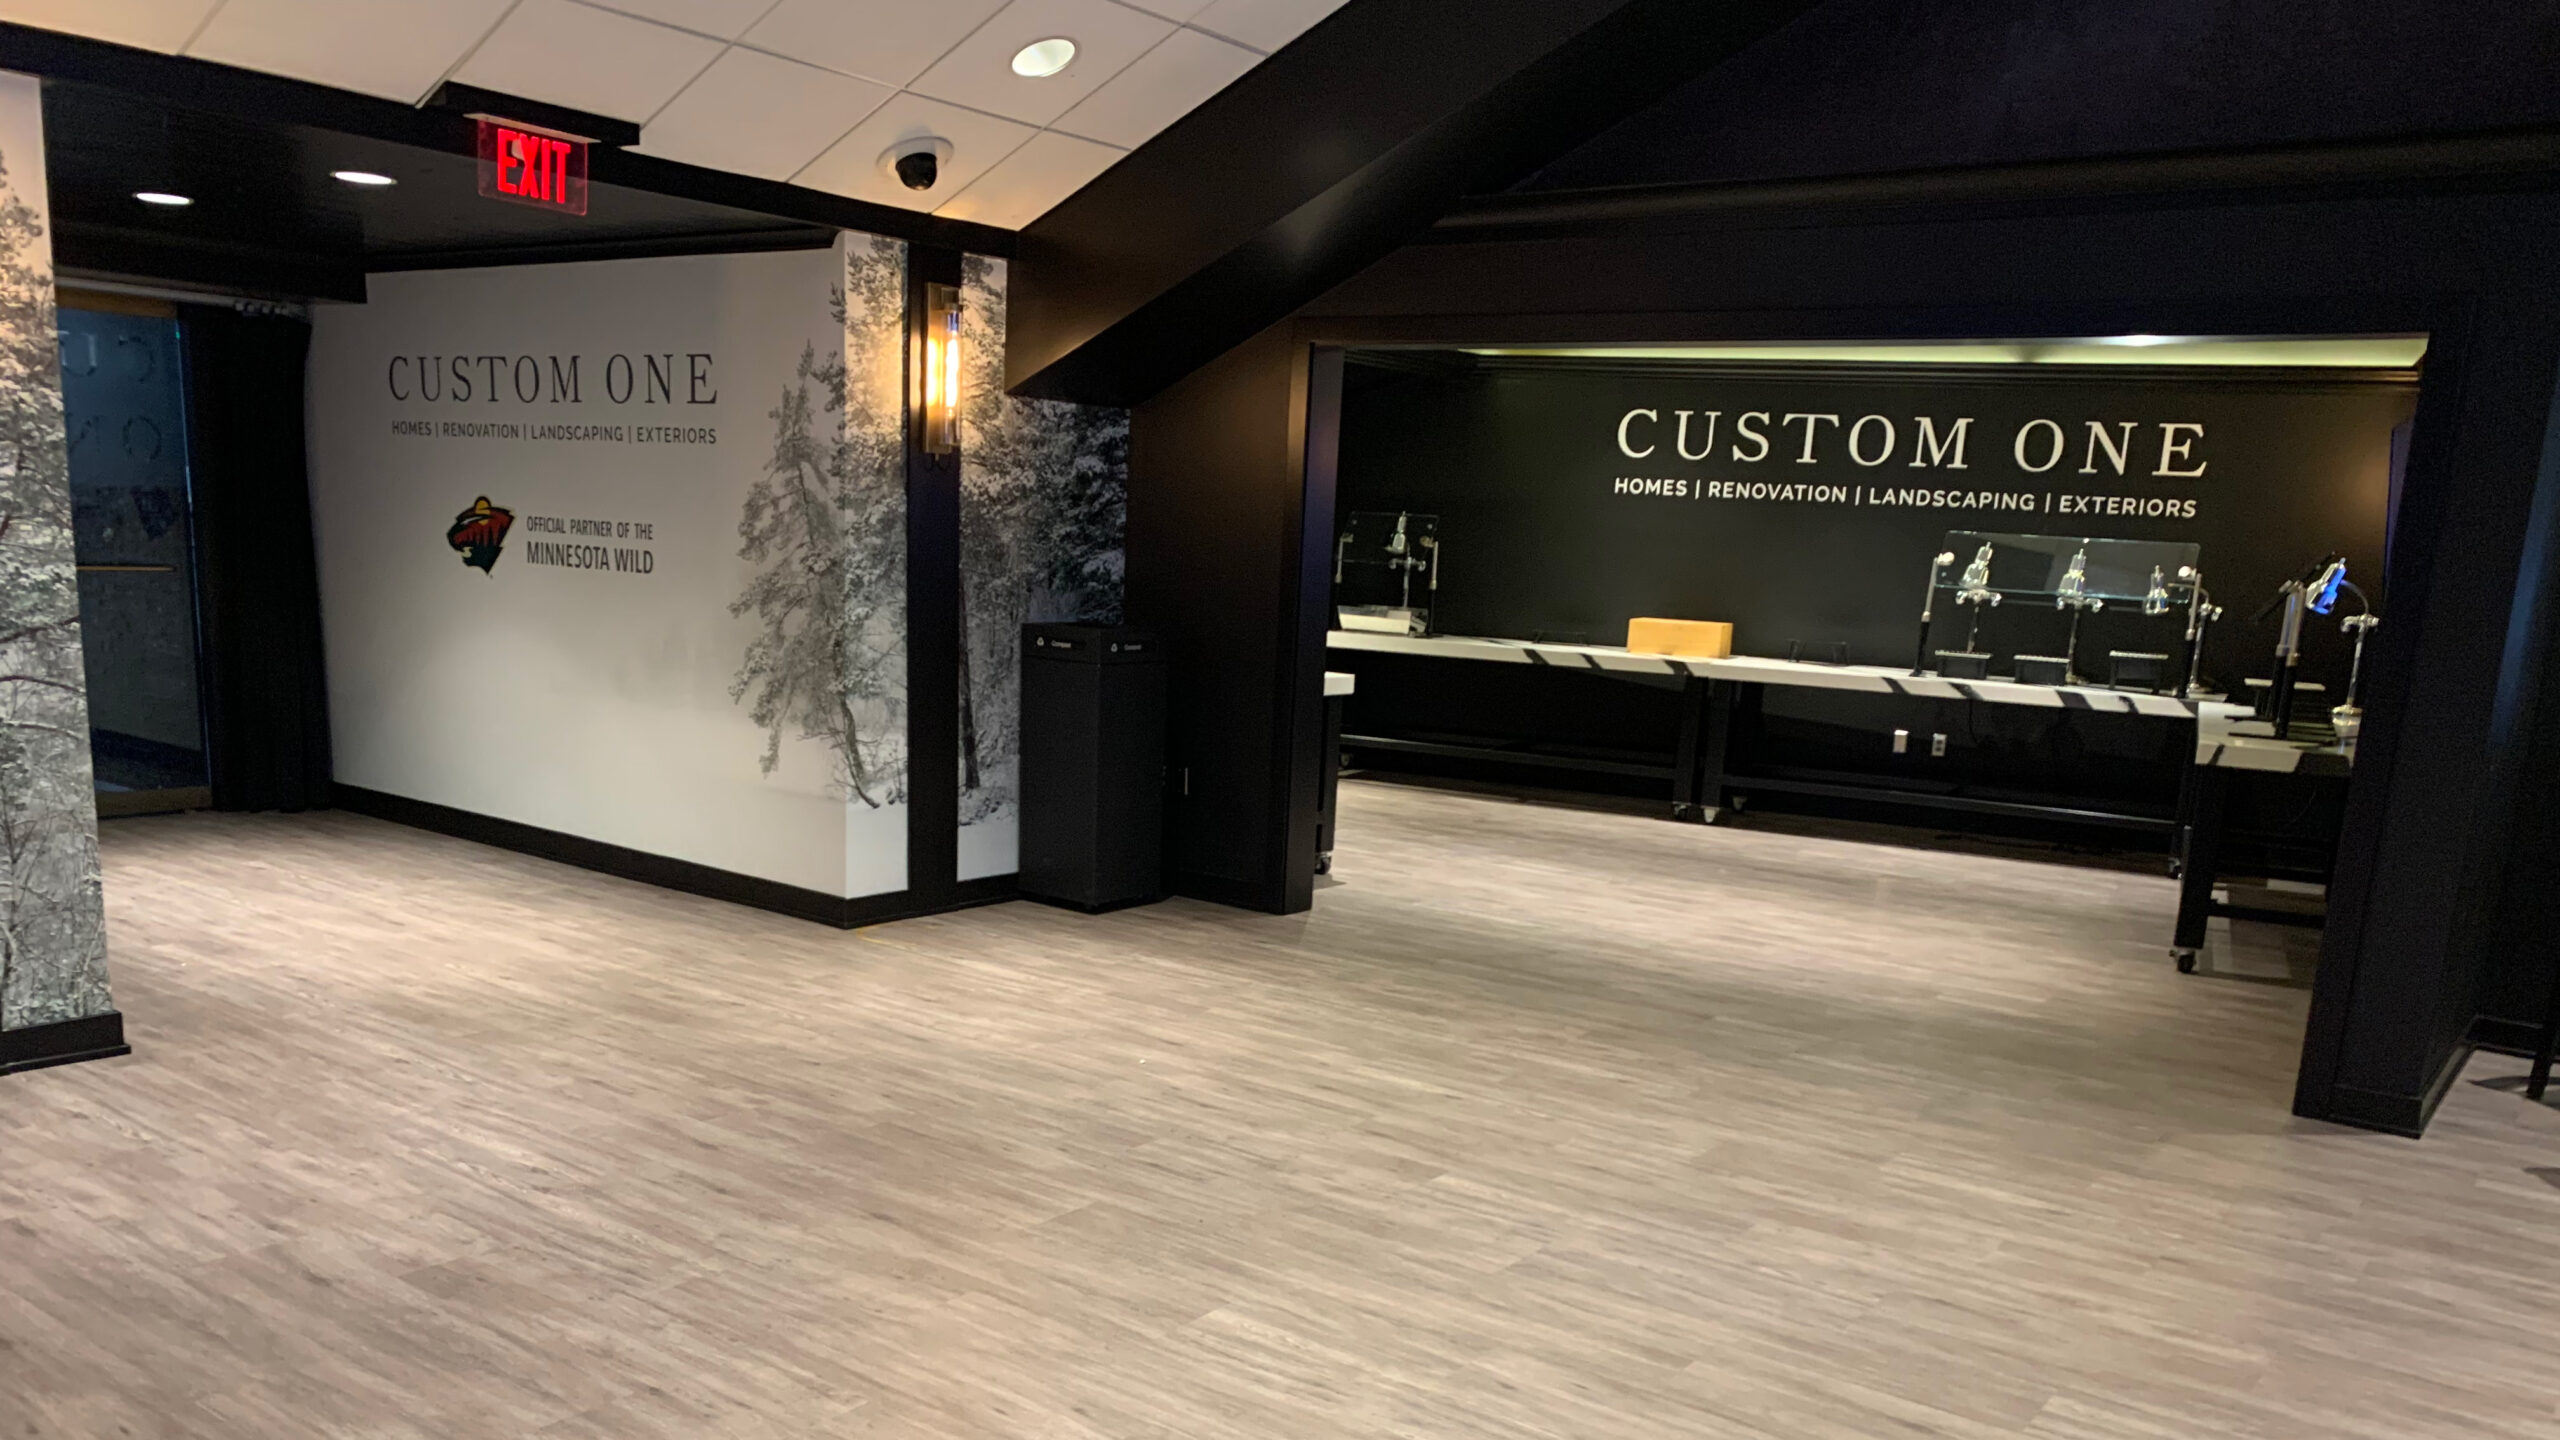 The Custom One Club with forest wall graphics and acrylic letters with a silver finish on the wall.